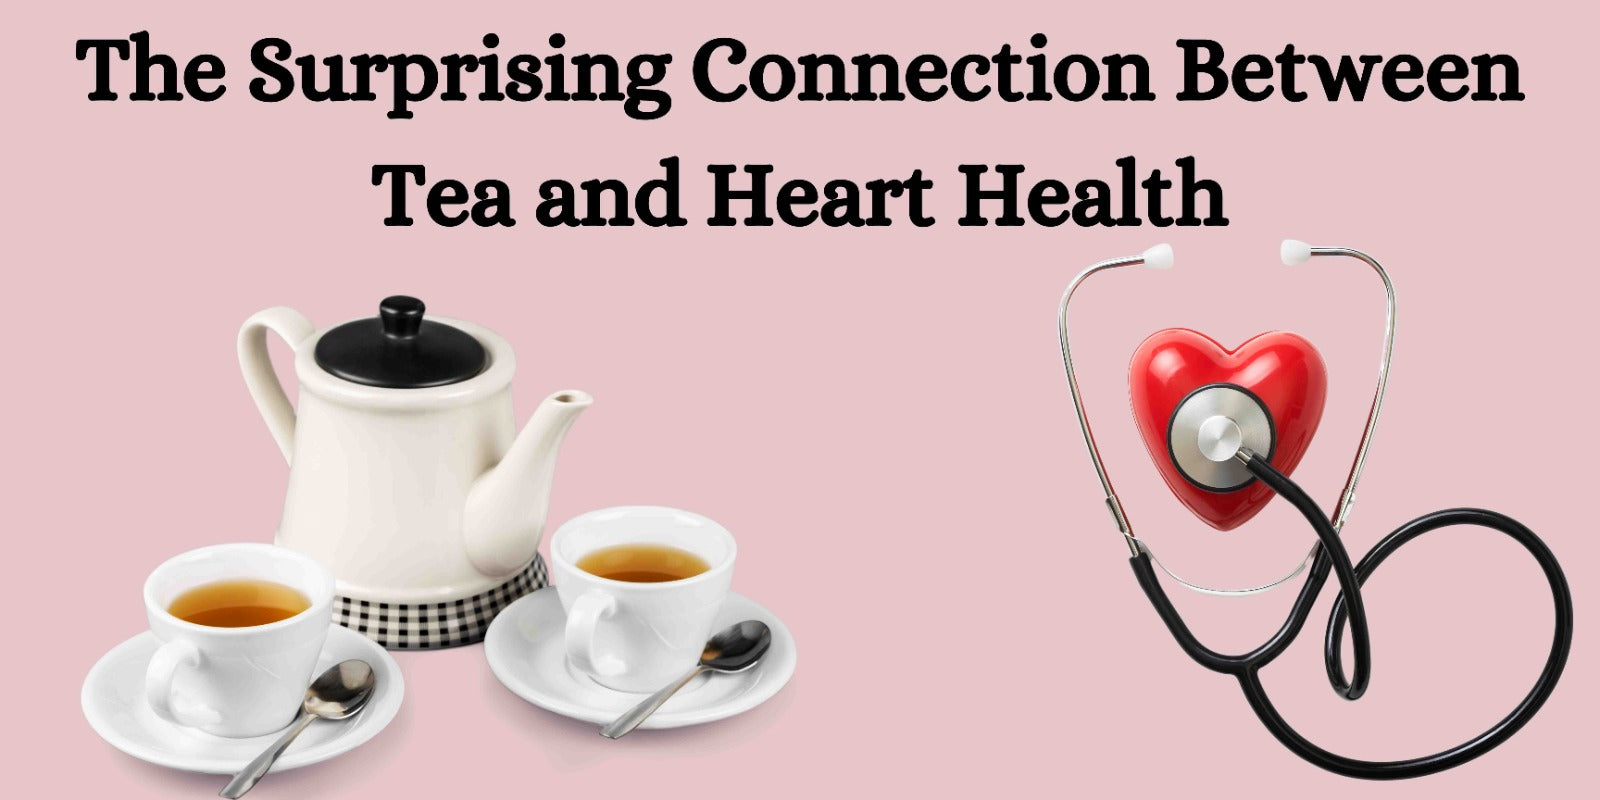 The Surprising Connection Between Tea and Heart Health